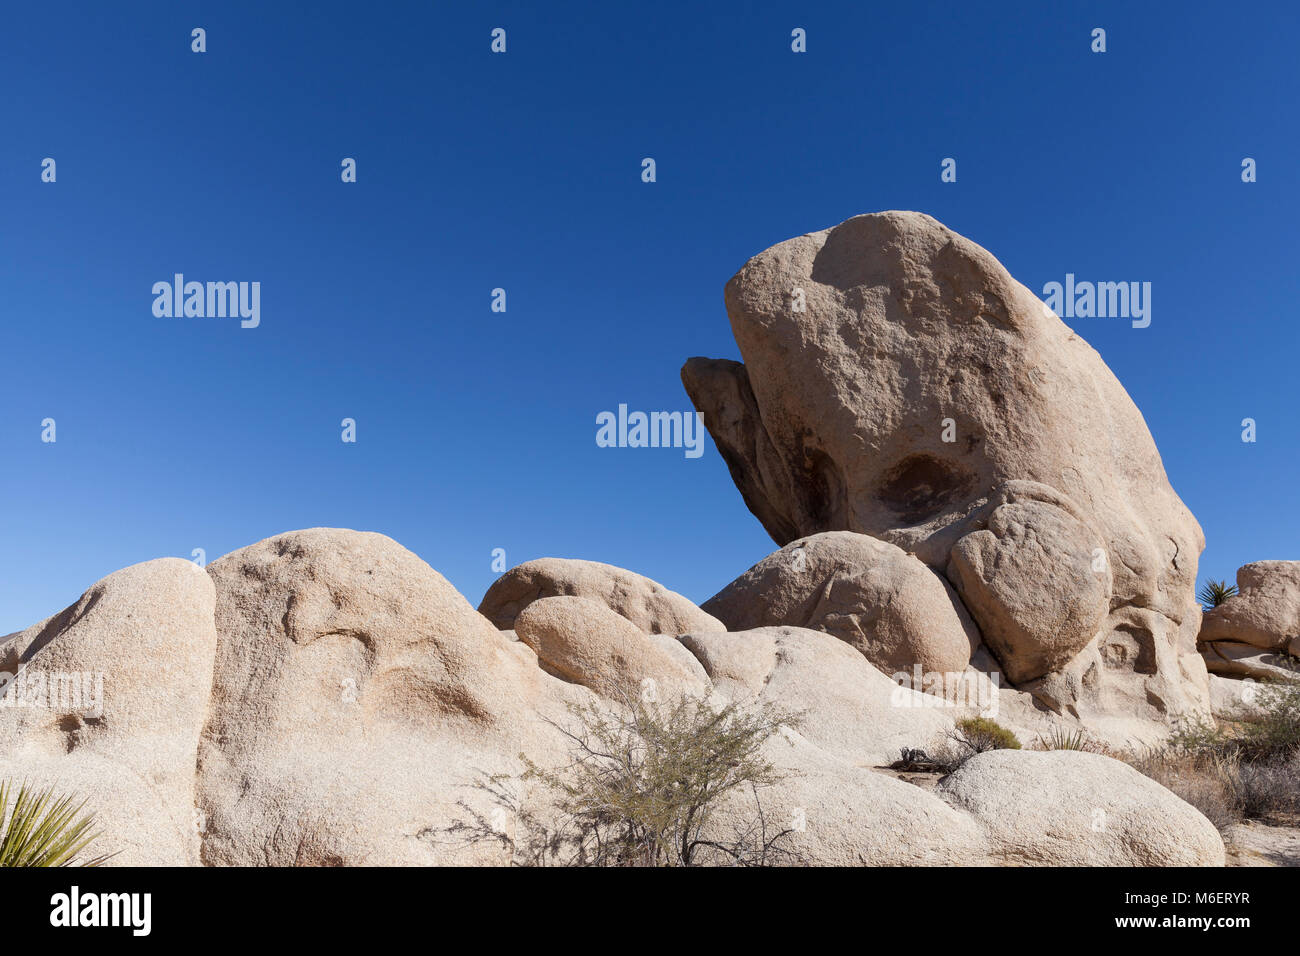 Joshua Tree National Park, California: Whale shaped rock formation along Arch Rock trail in the White Tank area. Stock Photo